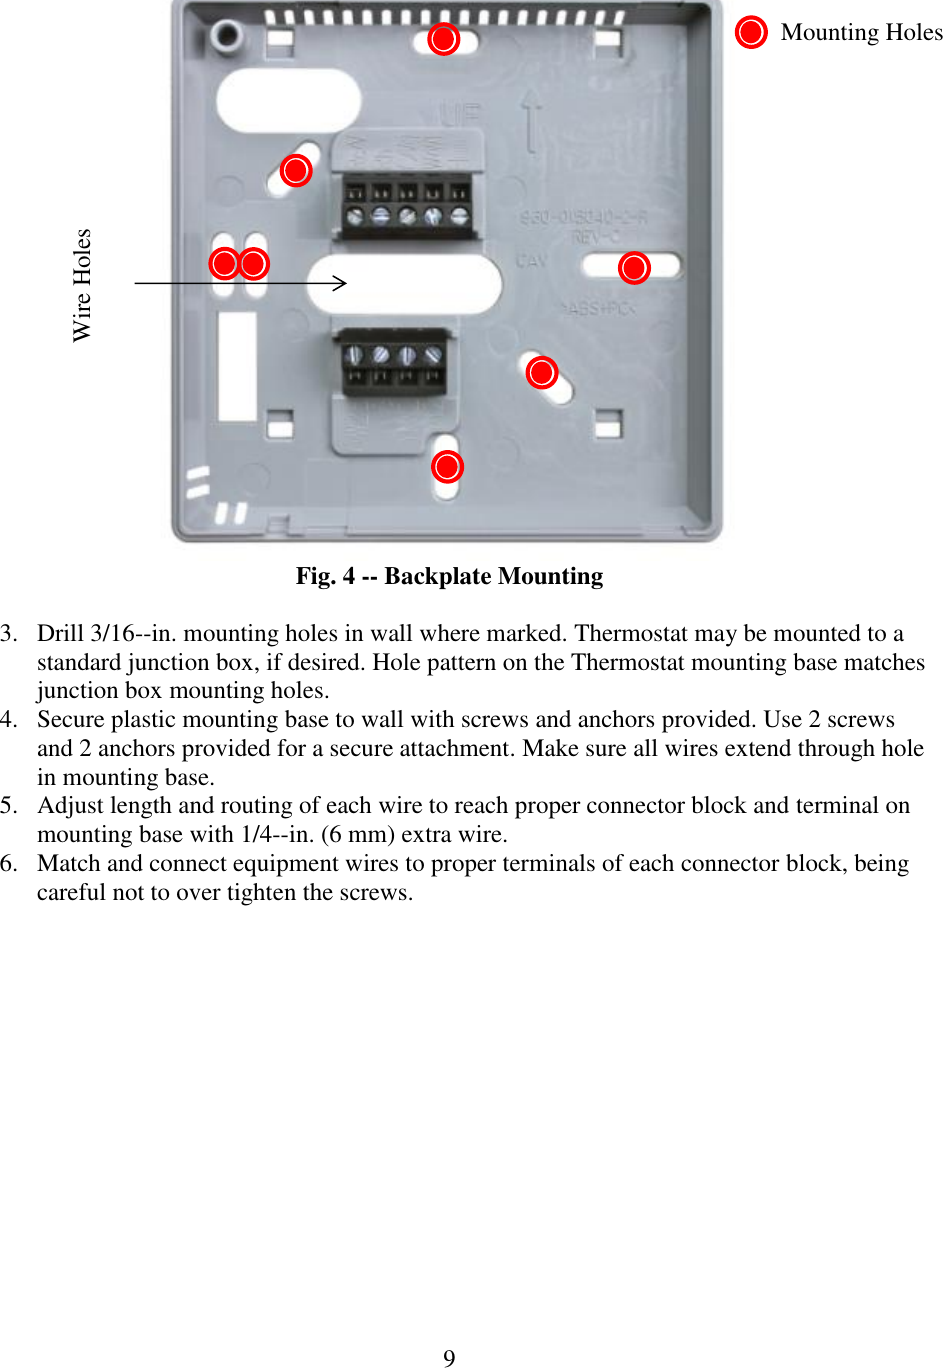 9   Fig. 4 -- Backplate Mounting  3. Drill 3/16--in. mounting holes in wall where marked. Thermostat may be mounted to a standard junction box, if desired. Hole pattern on the Thermostat mounting base matches junction box mounting holes. 4. Secure plastic mounting base to wall with screws and anchors provided. Use 2 screws and 2 anchors provided for a secure attachment. Make sure all wires extend through hole in mounting base. 5. Adjust length and routing of each wire to reach proper connector block and terminal on mounting base with 1/4--in. (6 mm) extra wire. 6. Match and connect equipment wires to proper terminals of each connector block, being careful not to over tighten the screws.   Wire Holes Mounting Holes 